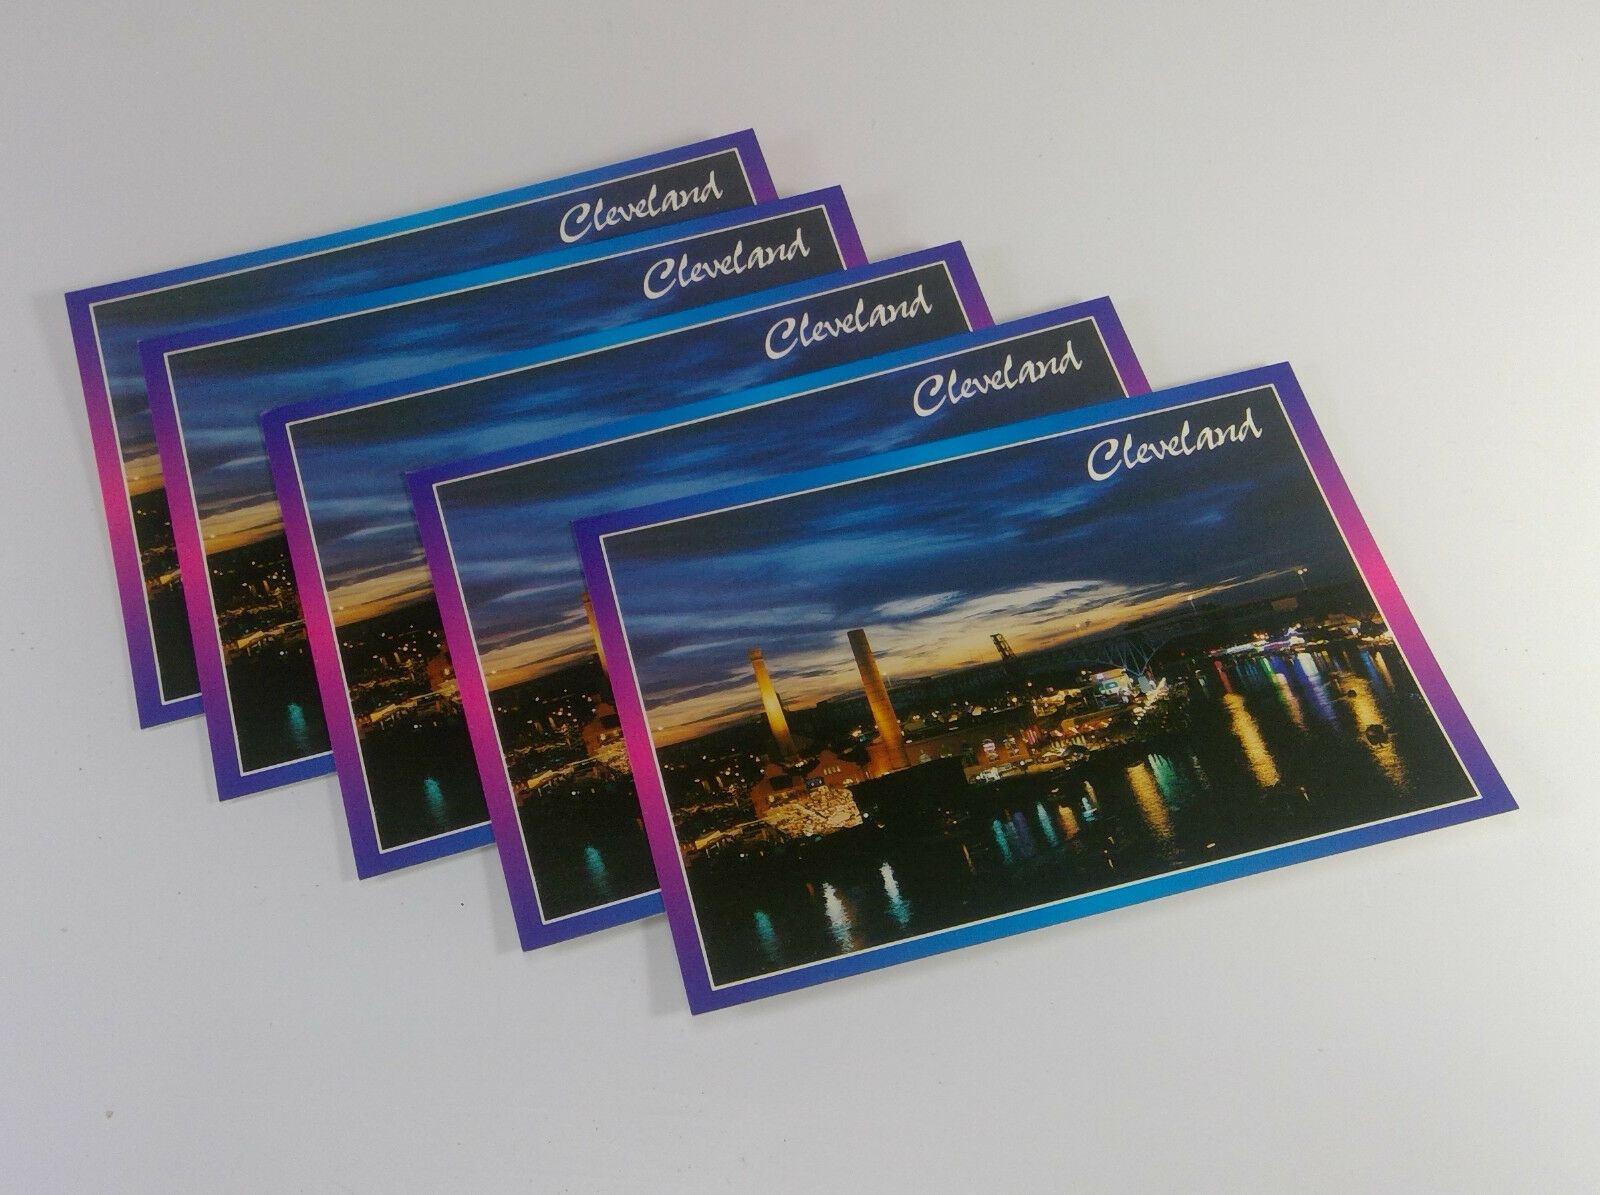 Five Cleveland postcards fanned out